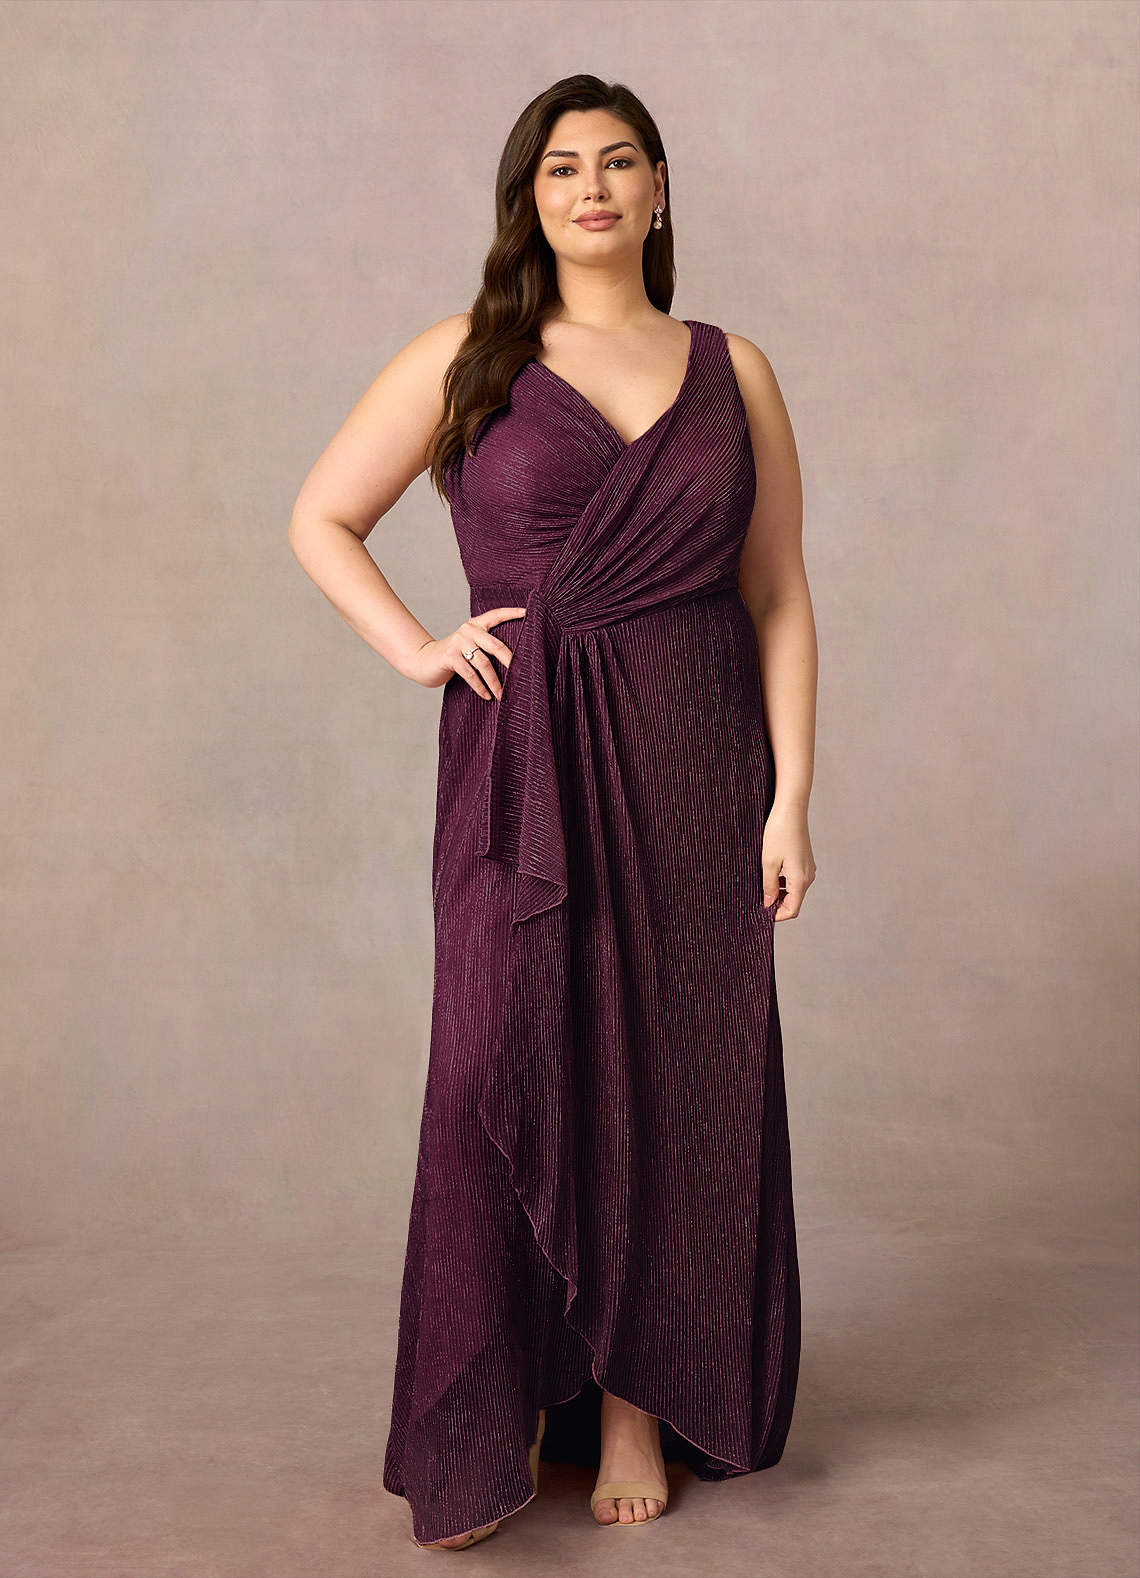 Upstudio Tuscon Mother of the Bride Dresses A-Line V-Neck Ruched Metallic Mesh Asymmetrical Dress image1